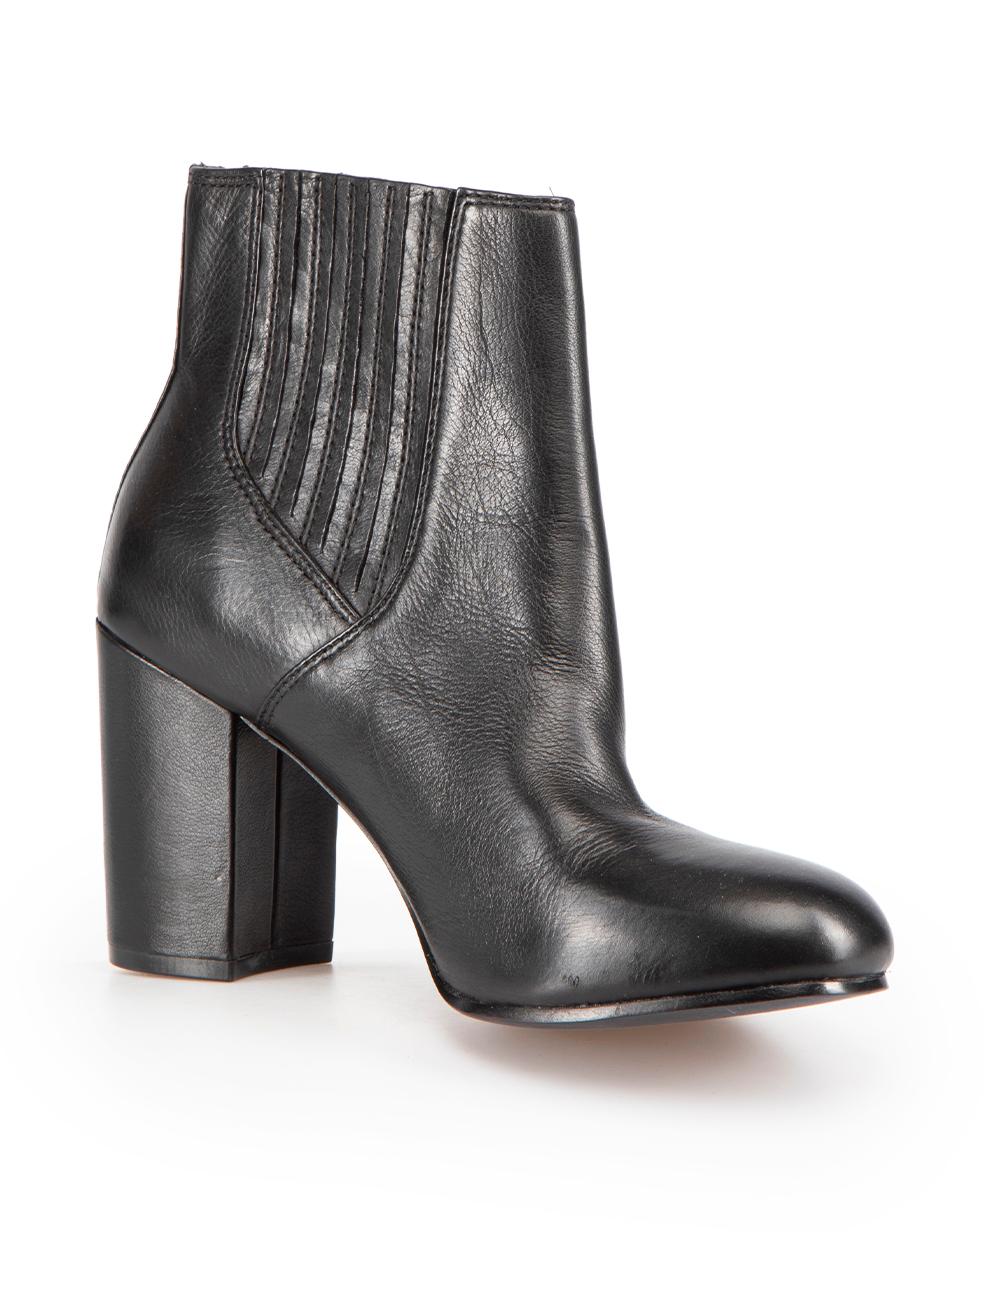 CONDITION is Very good. Minimal wear to boots is evident. Minimal wear to the left-side of the left boot and heel with indents and light abrasions to the leather on this used ASH designer resale item.
 
 Details
 Black
 Leather
 Ankle boots
 Round